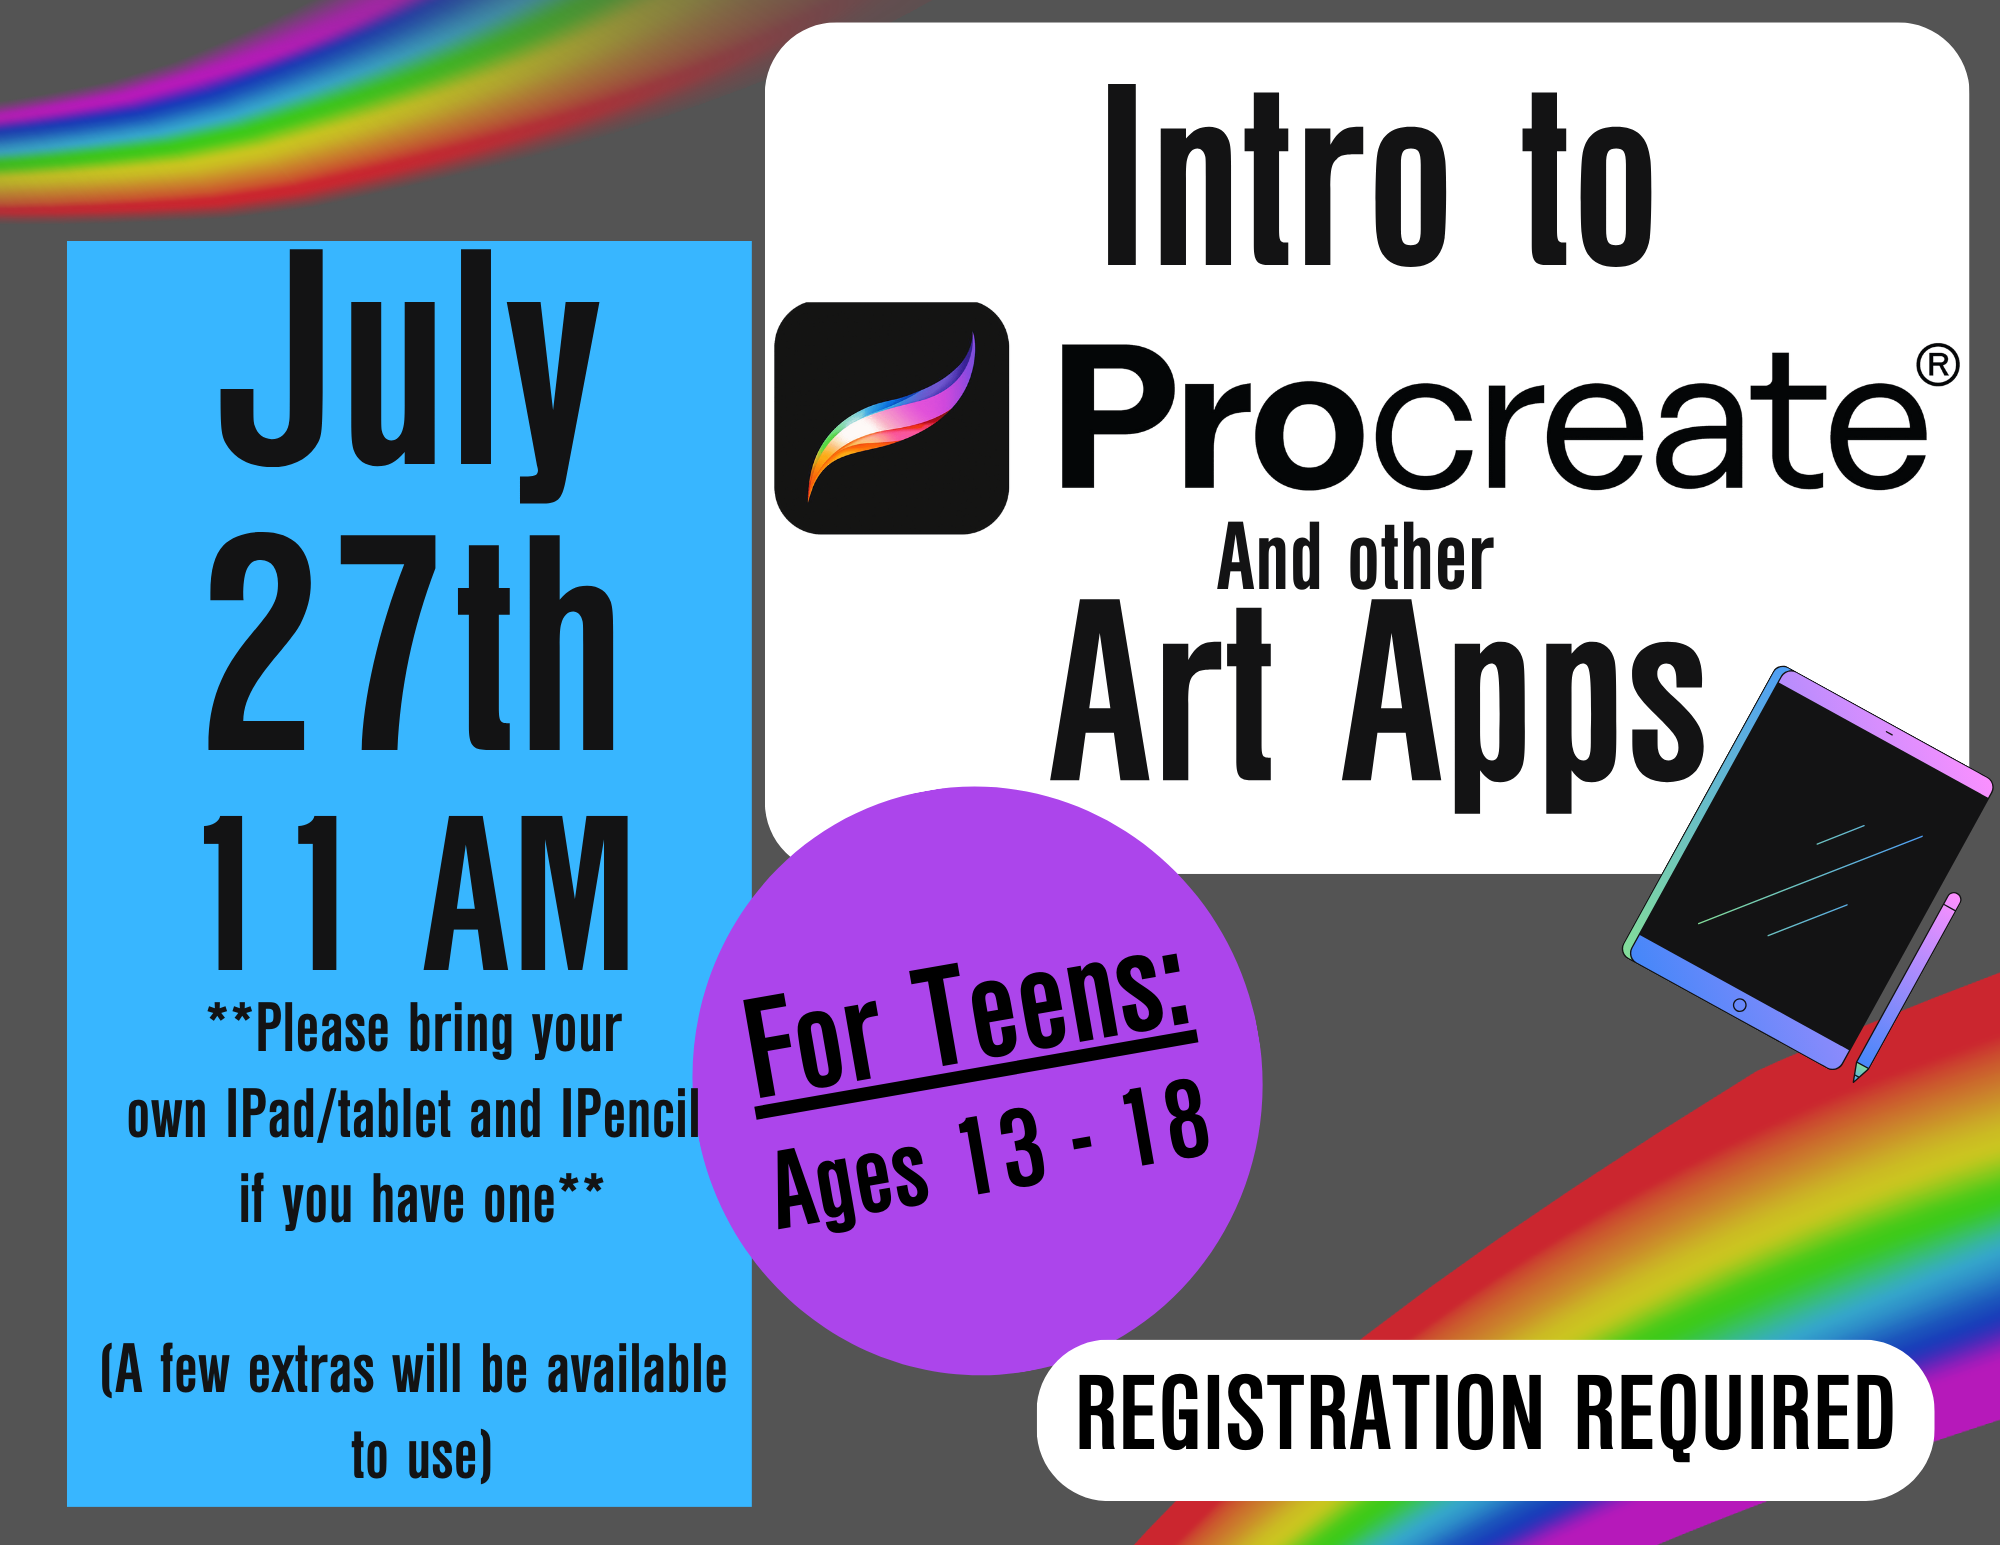 Intro to Procreate and other Art Apps. July 27th 11 AM for Teens Ages 13-16. Please bring IPad/ tablet and IPencil if have one, a few will be available to use, *REGISTRATION REQUIRED*